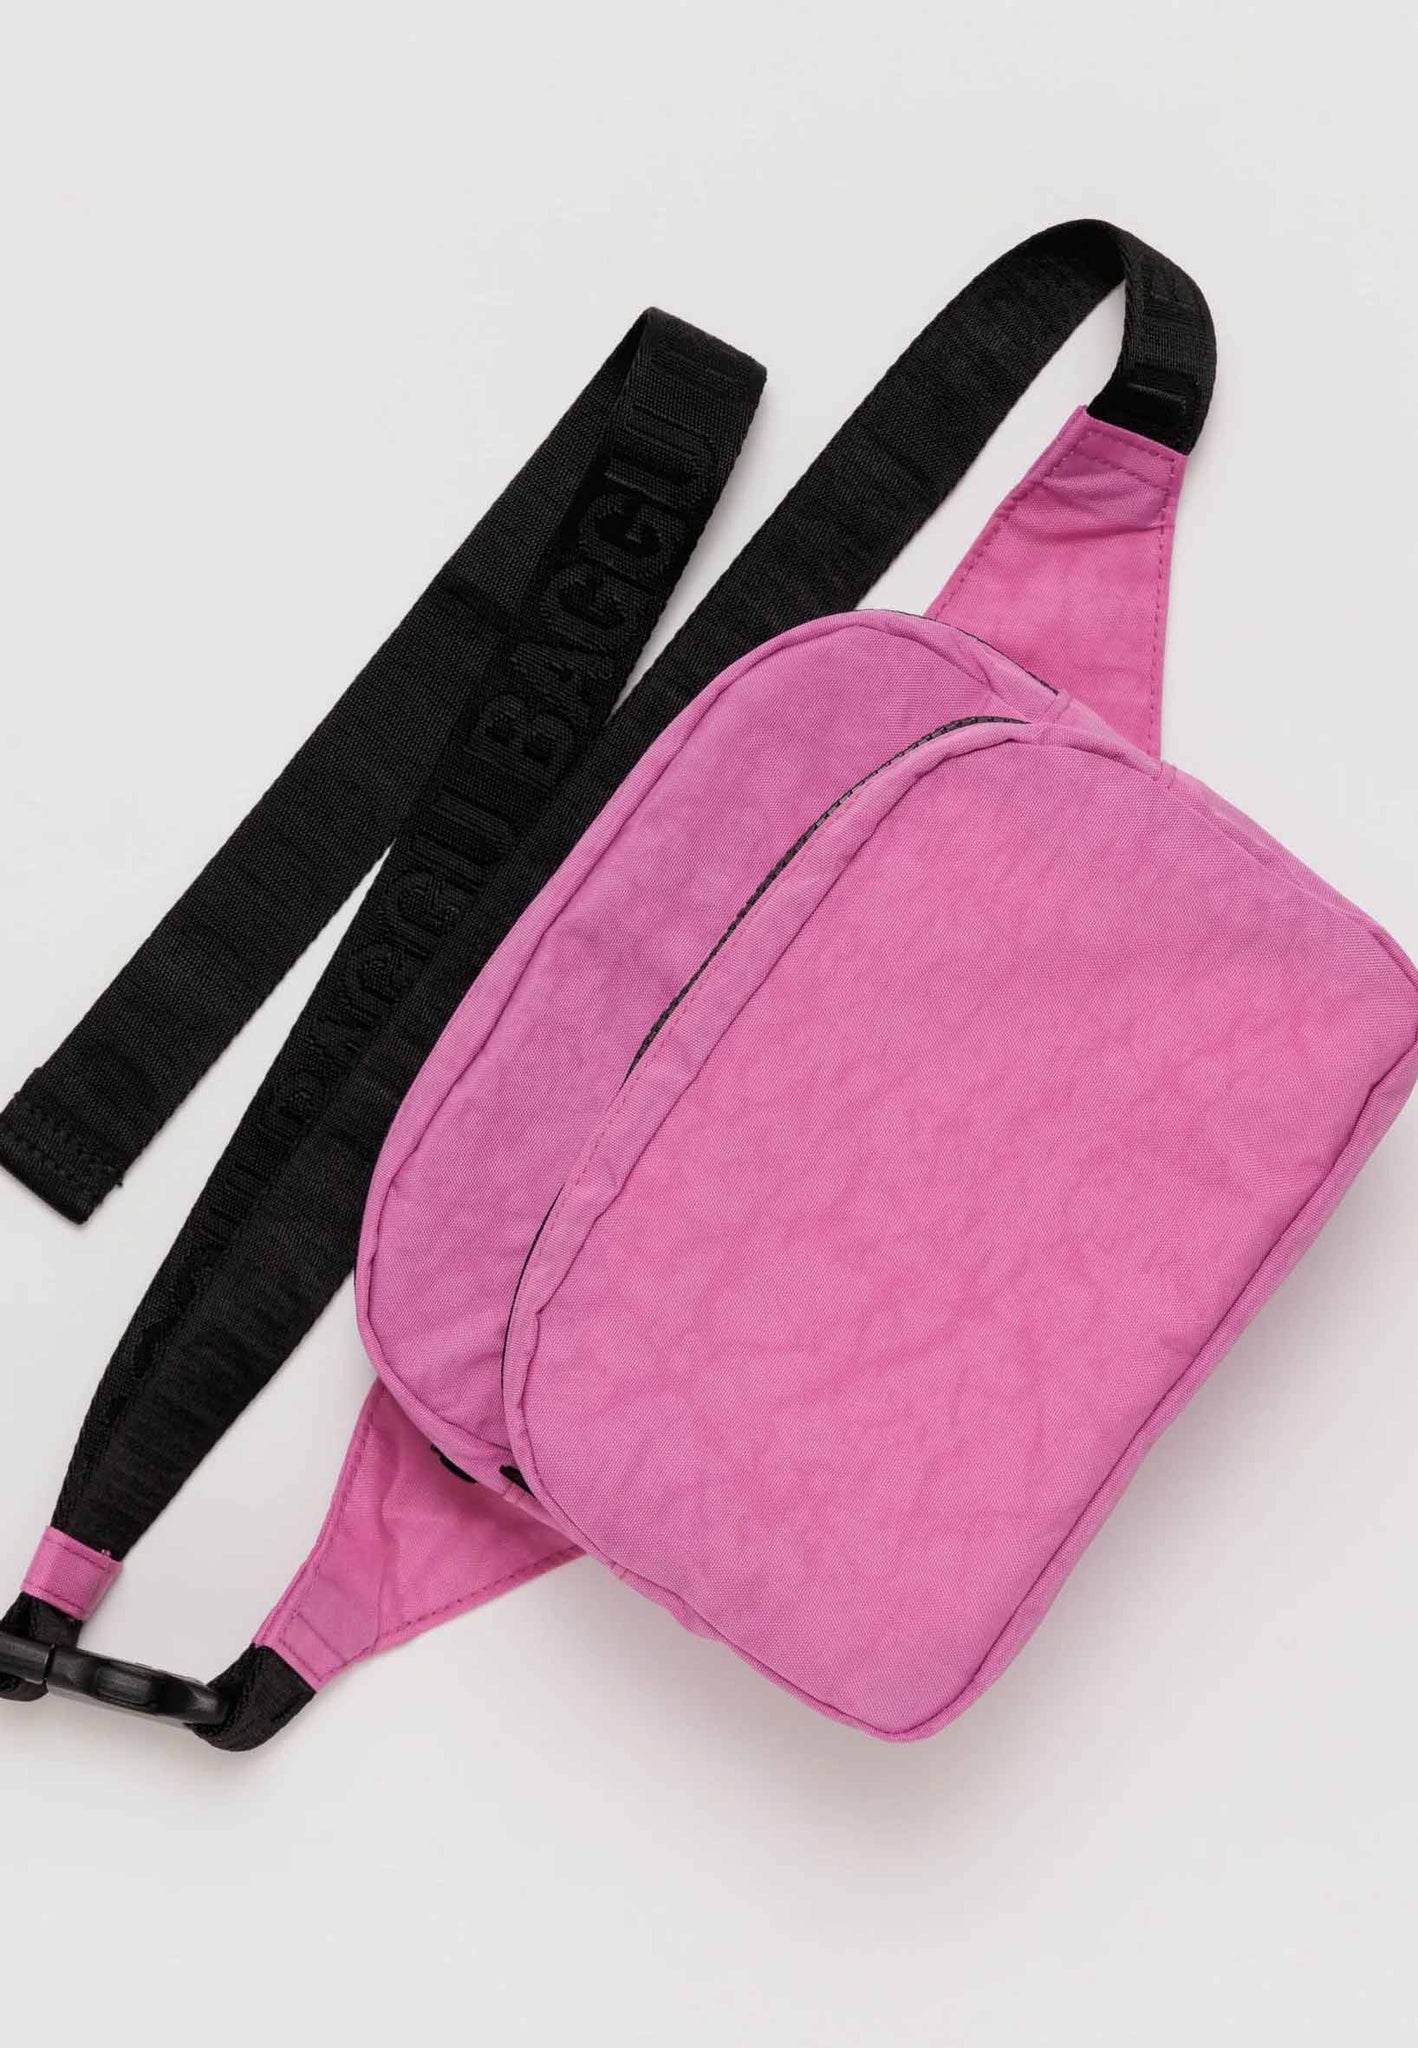 Baggu Fanny Pack Extra Pink